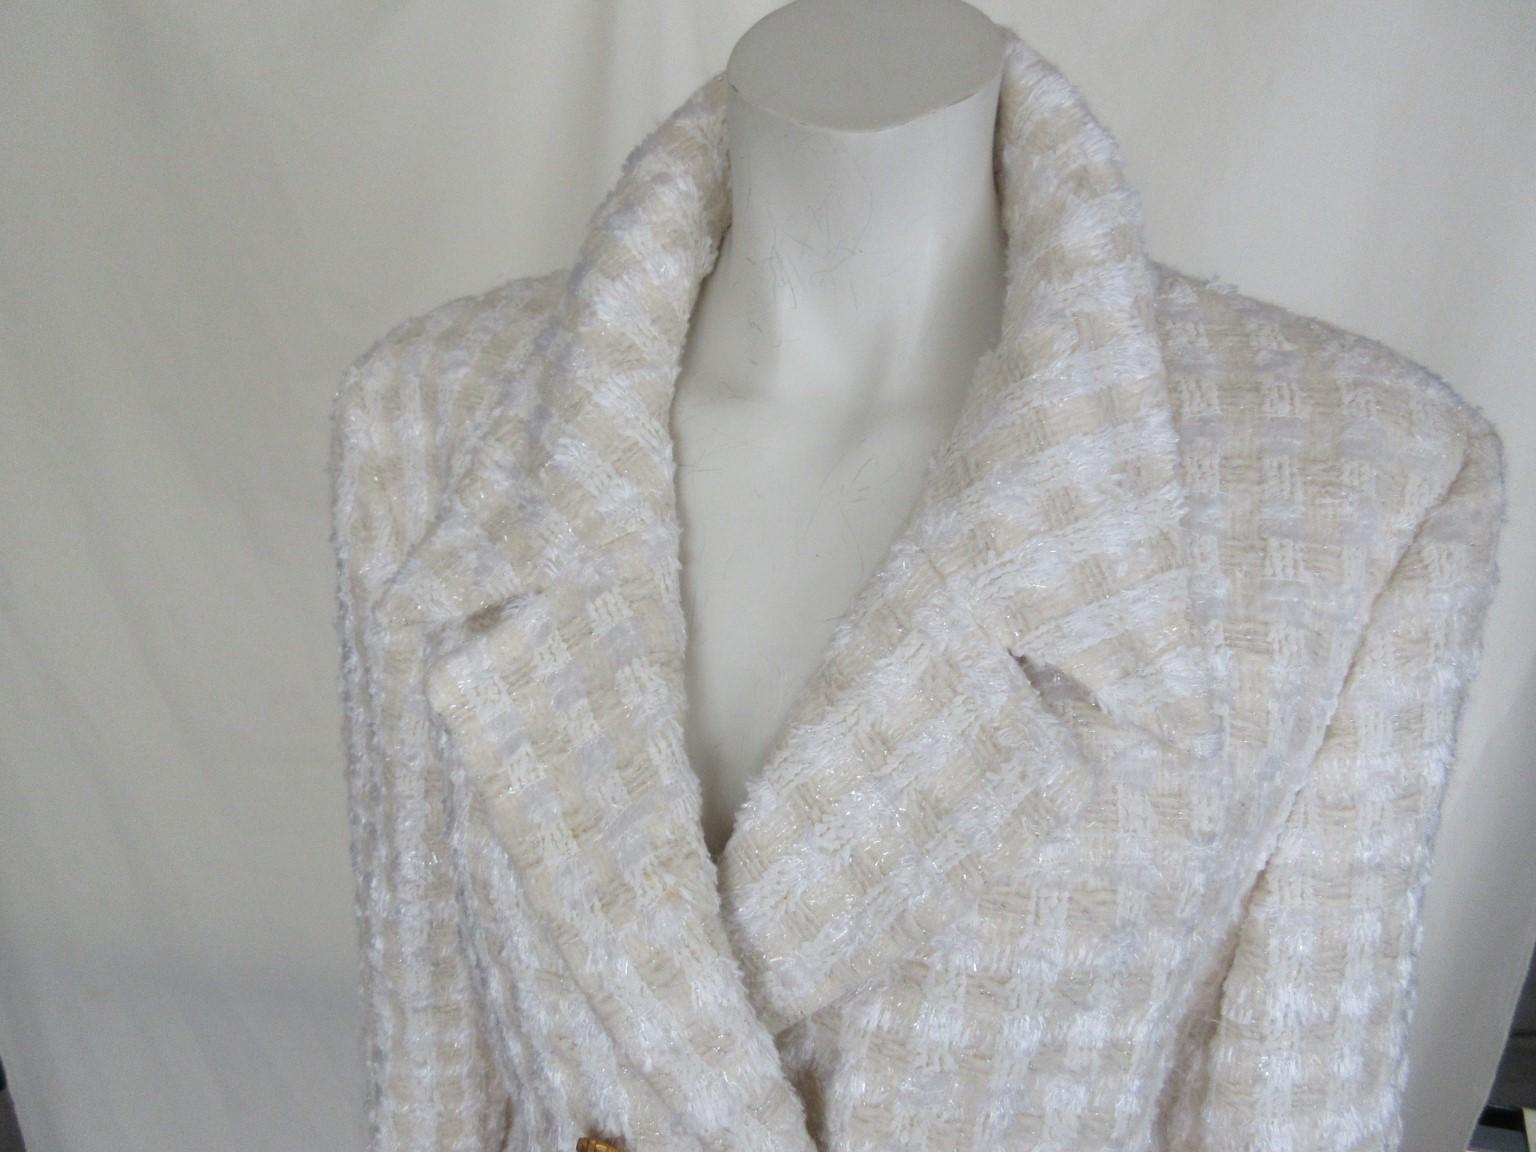 1980's Escada by Margareth Ley , 2 piece in Chanel style

We offer more exclusive Hermes, Gucci, Escada items, view our frontstore

Details blazer:
Interior with escada logo lined, 
double brested
6 x gold tone button closures and sleeves
Wool